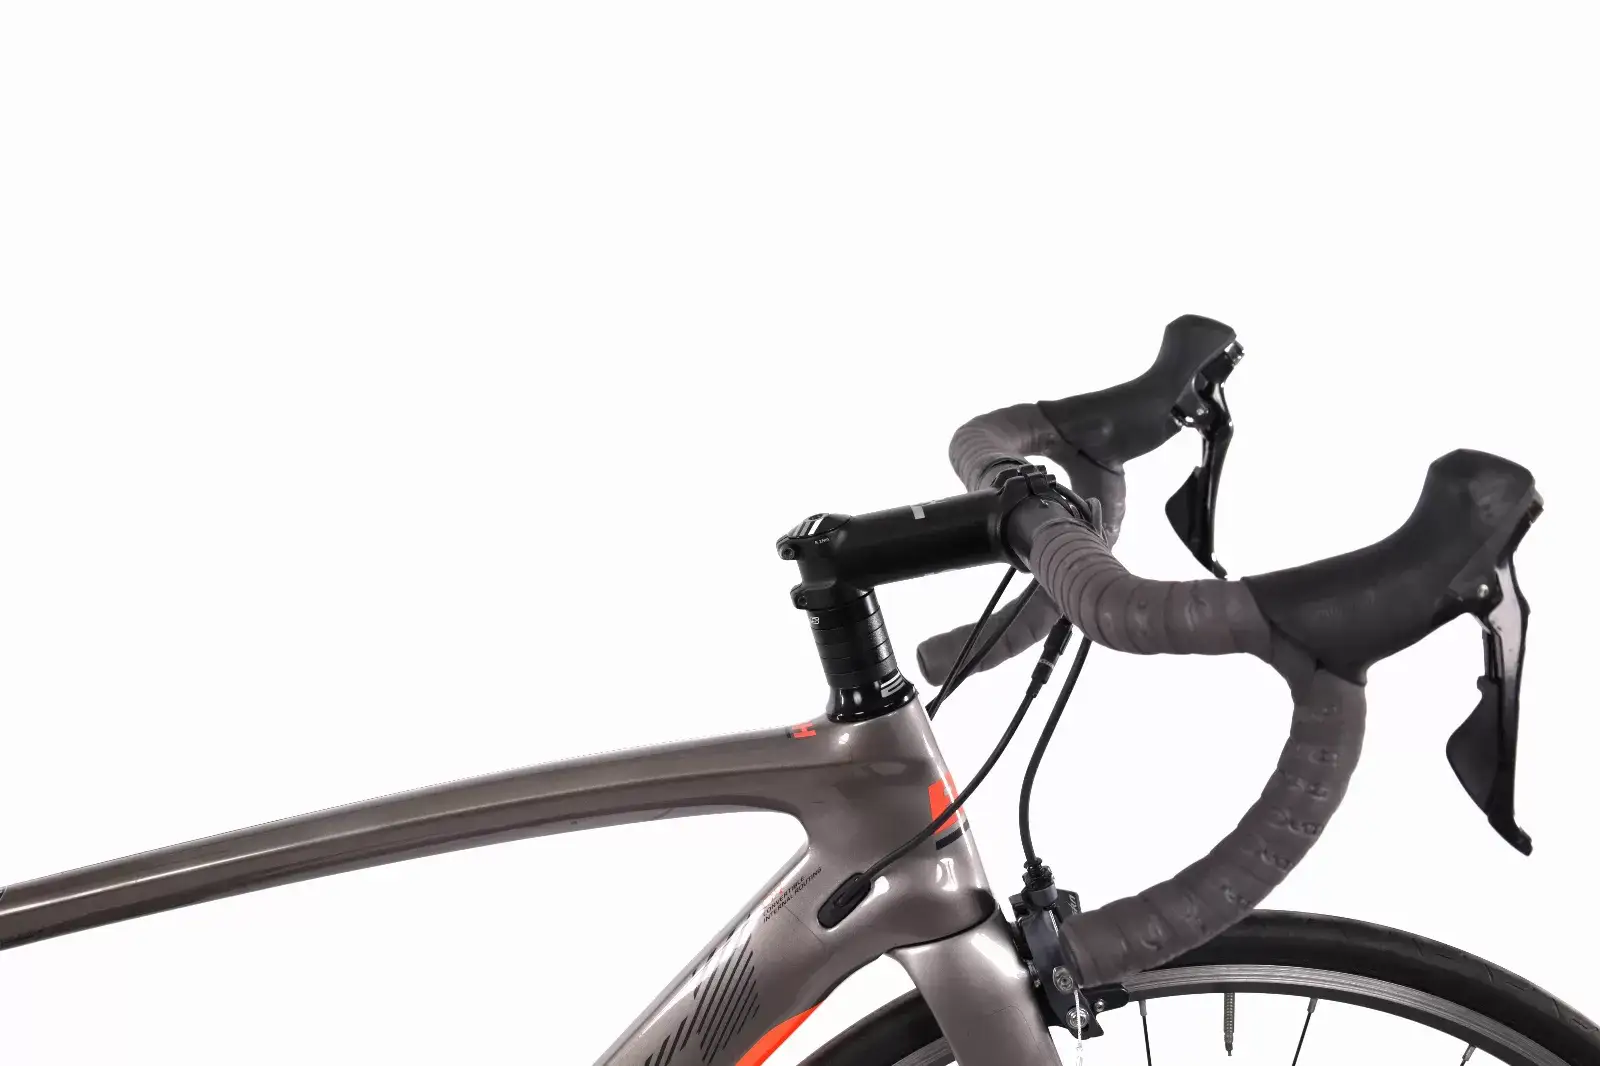 BH G7 Pro Ultegra used in S | buycycle USA